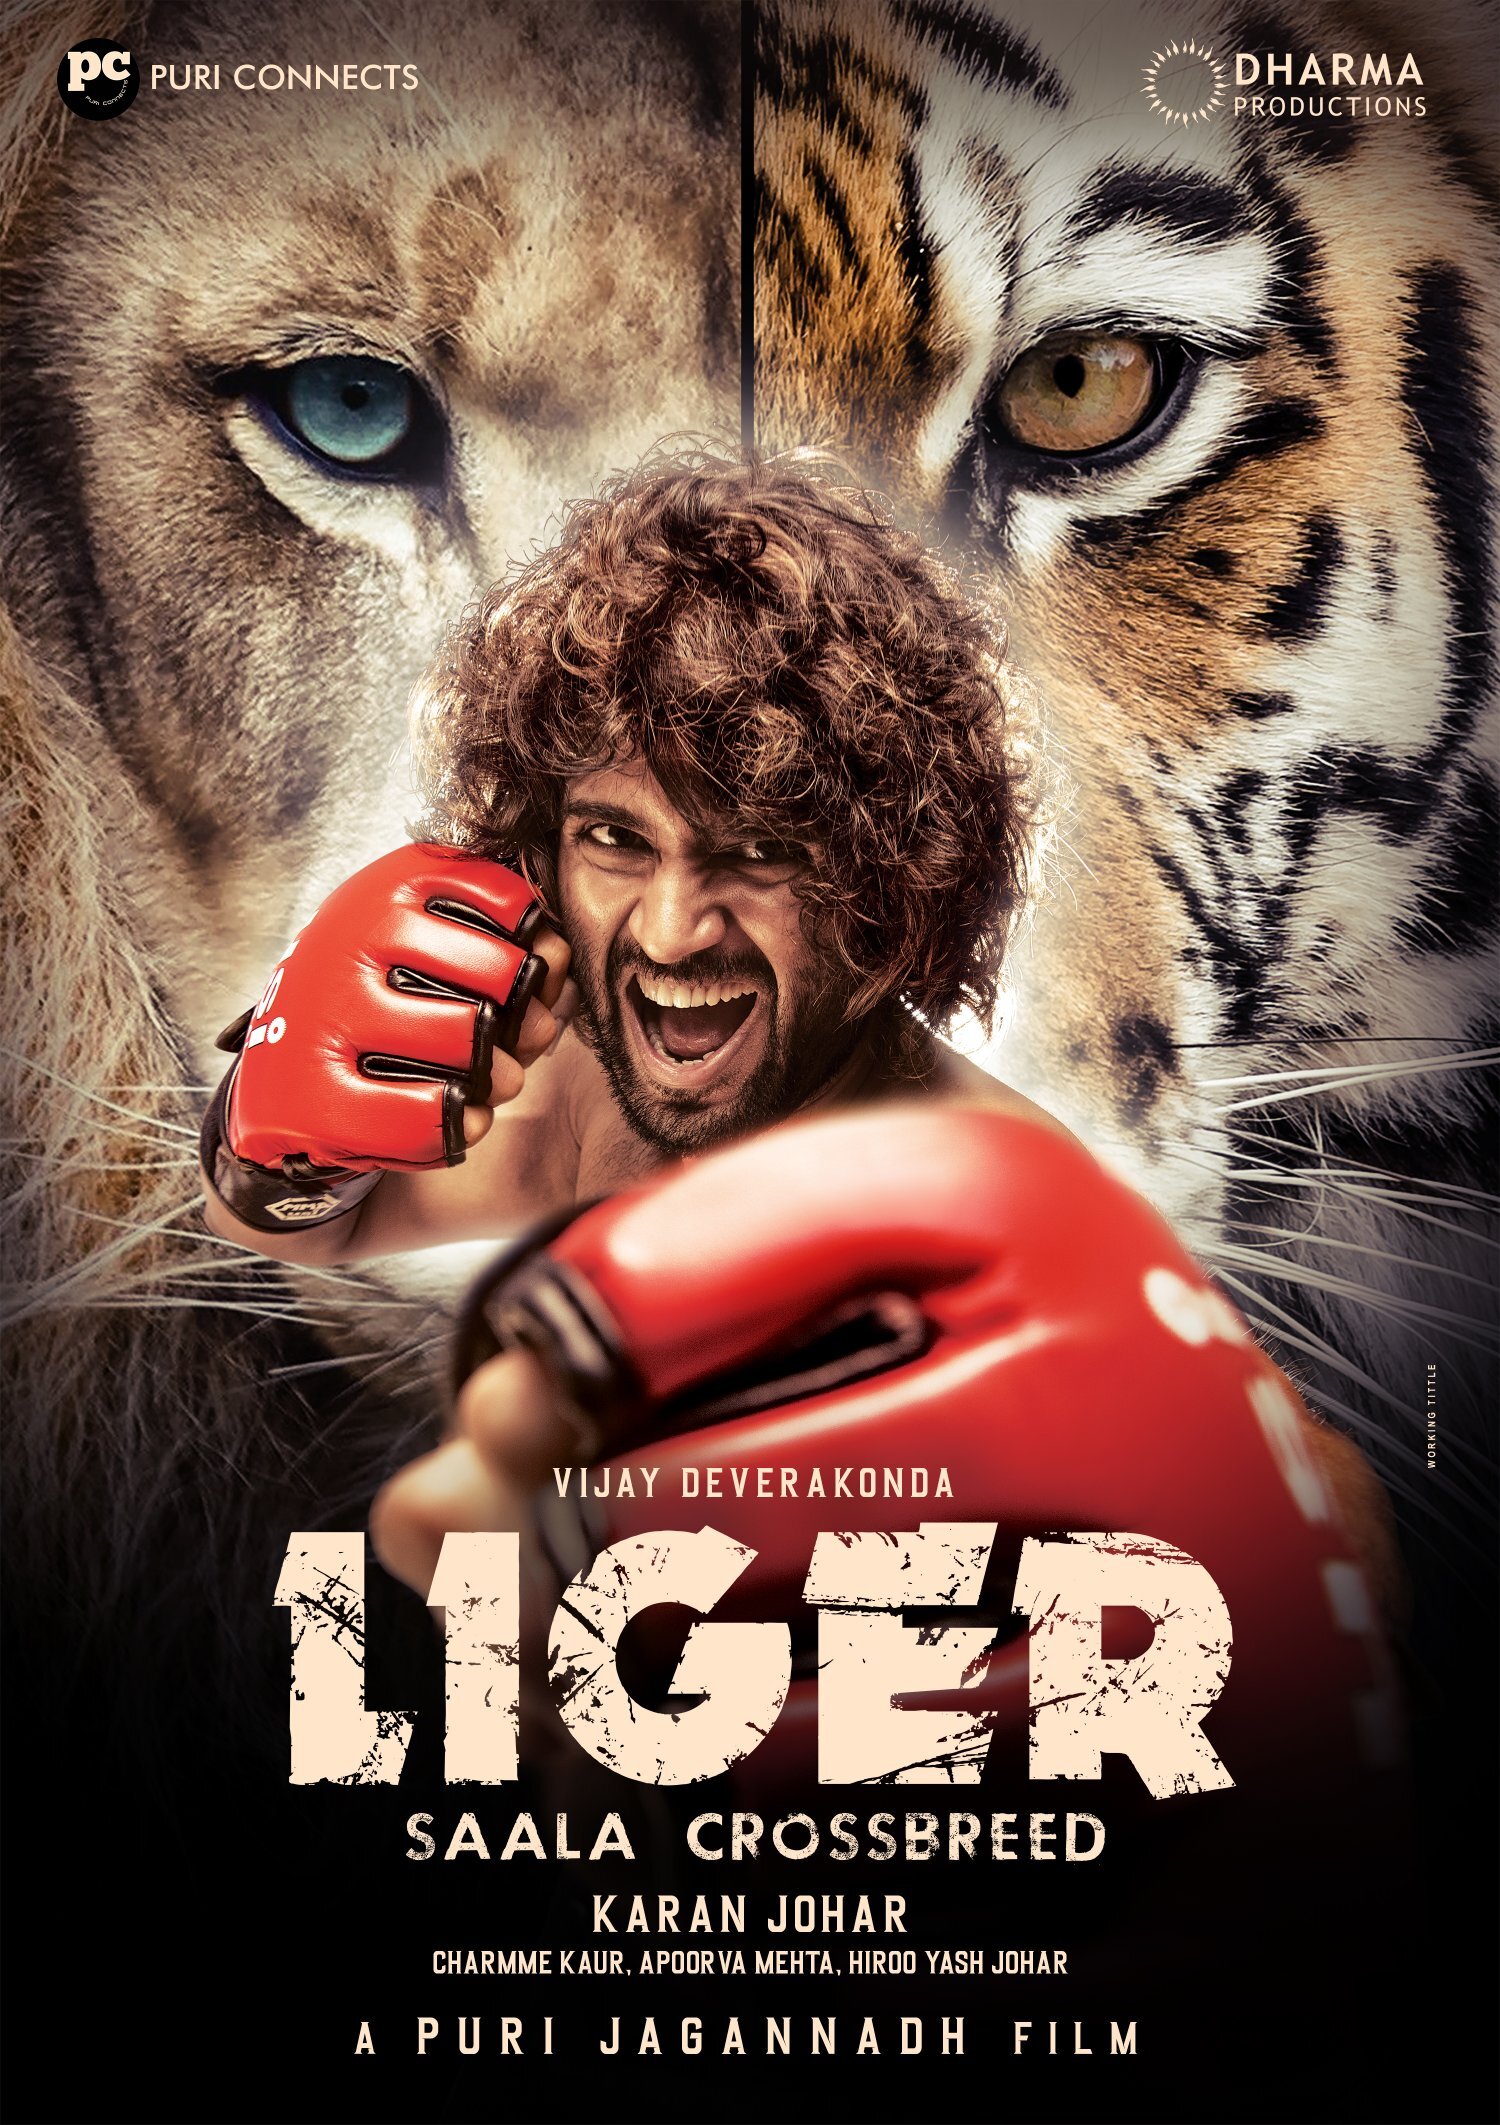 Liger Photo: HD Image, Picture, Stills, First Look Posters of Liger Movie